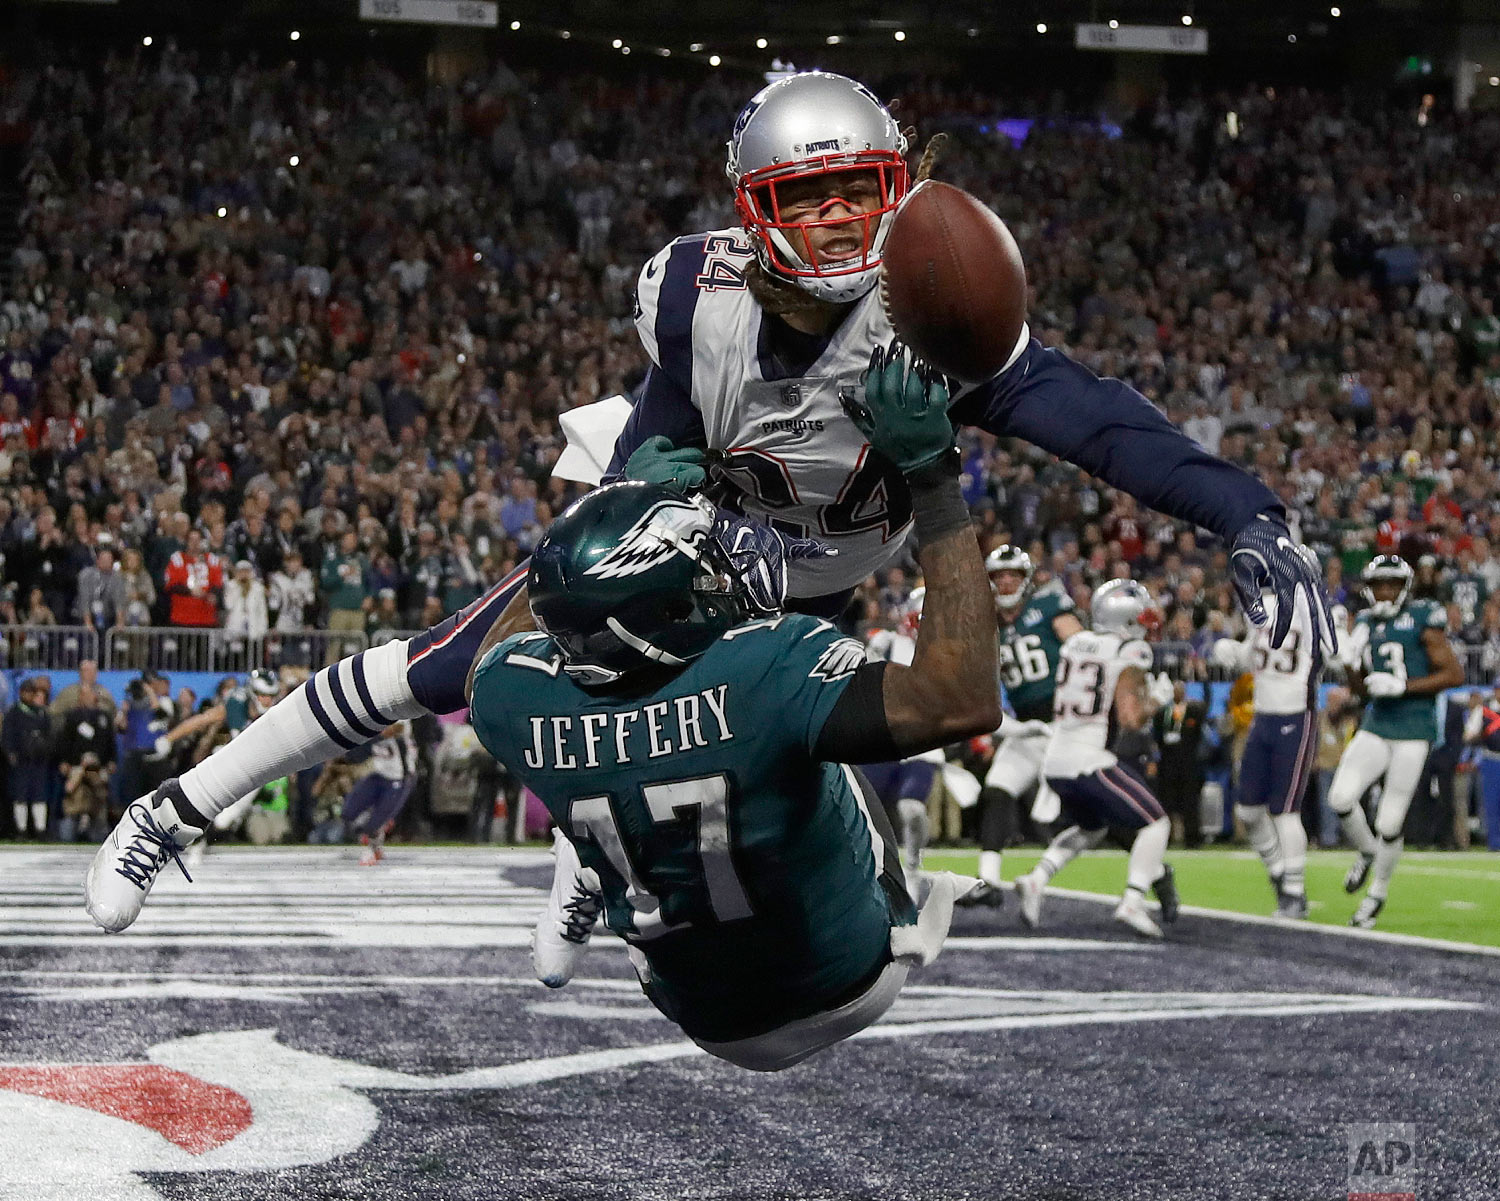  New England Patriots' Stephon Gilmore, top, breaks up a pass intended for Philadelphia Eagles' Alshon Jeffery during the first half of the NFL Super Bowl 52 football game on Feb. 4, 2018, in Minneapolis. (AP Photo/Matt Slocum) 